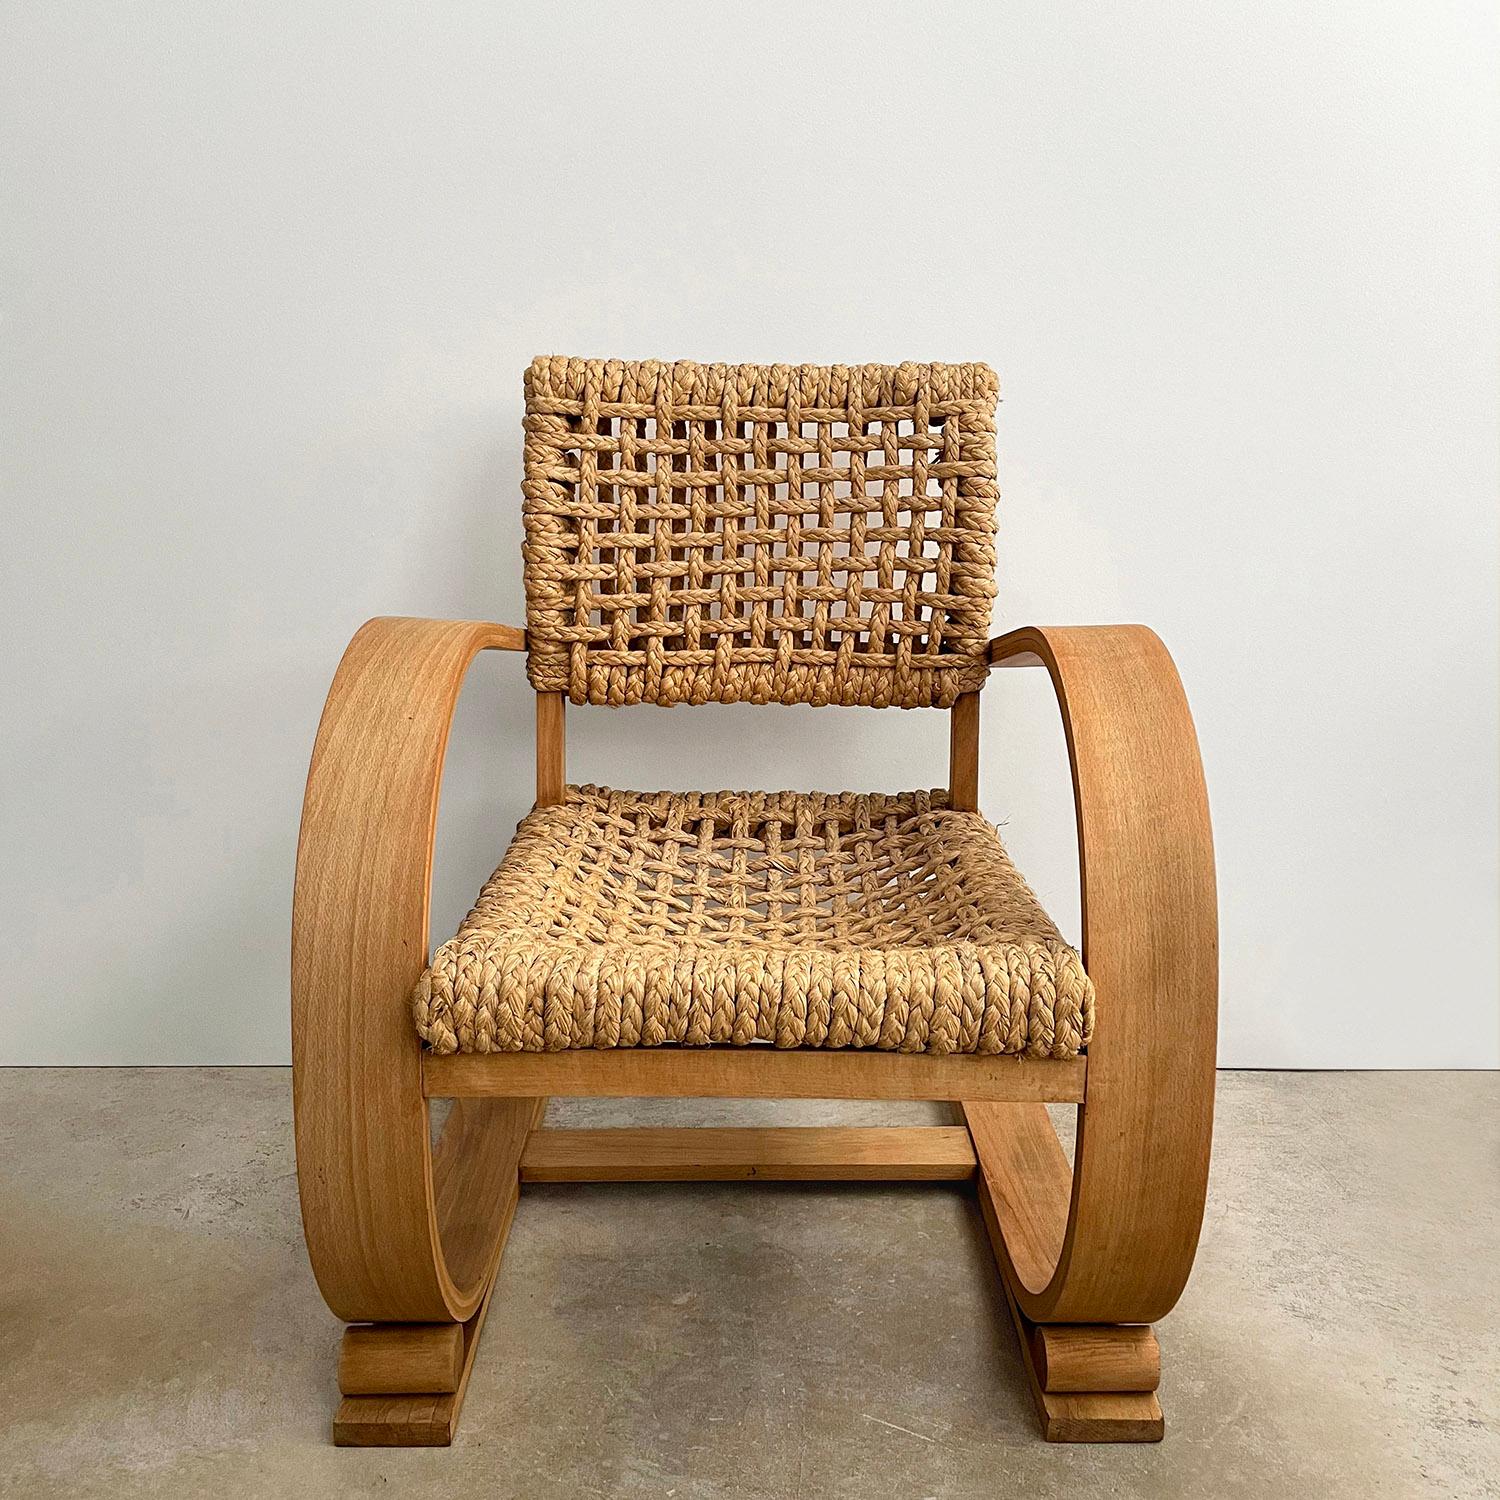 Adrien Audoux & Frida Minet Cantilevered Bentwood Lounge Chairs
France, circa 1950’s
Manufactured by Vibo Vesou
Iconic and timeless classic design that only gets better with age
Cantilevered bentwood frames with intricately woven rope backrests and